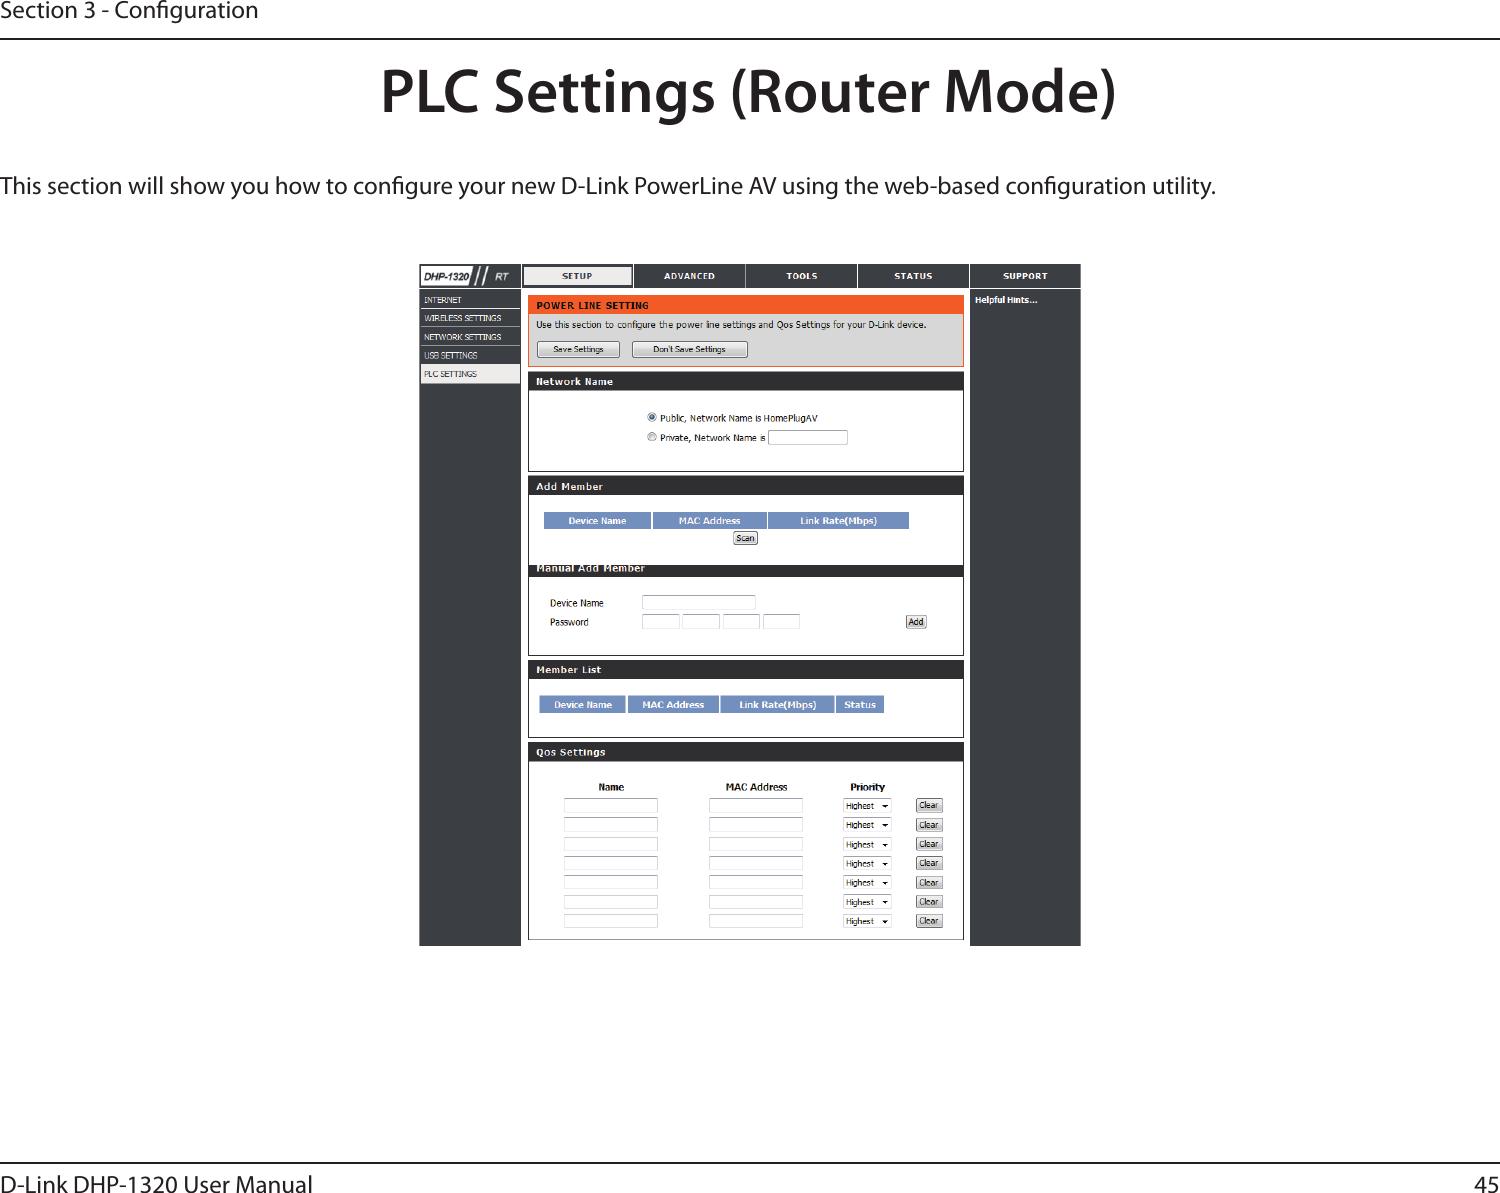 45D-Link DHP-1320 User ManualSection 3 - CongurationThis section will show you how to congure your new D-Link PowerLine AV using the web-based conguration utility.PLC Settings (Router Mode)